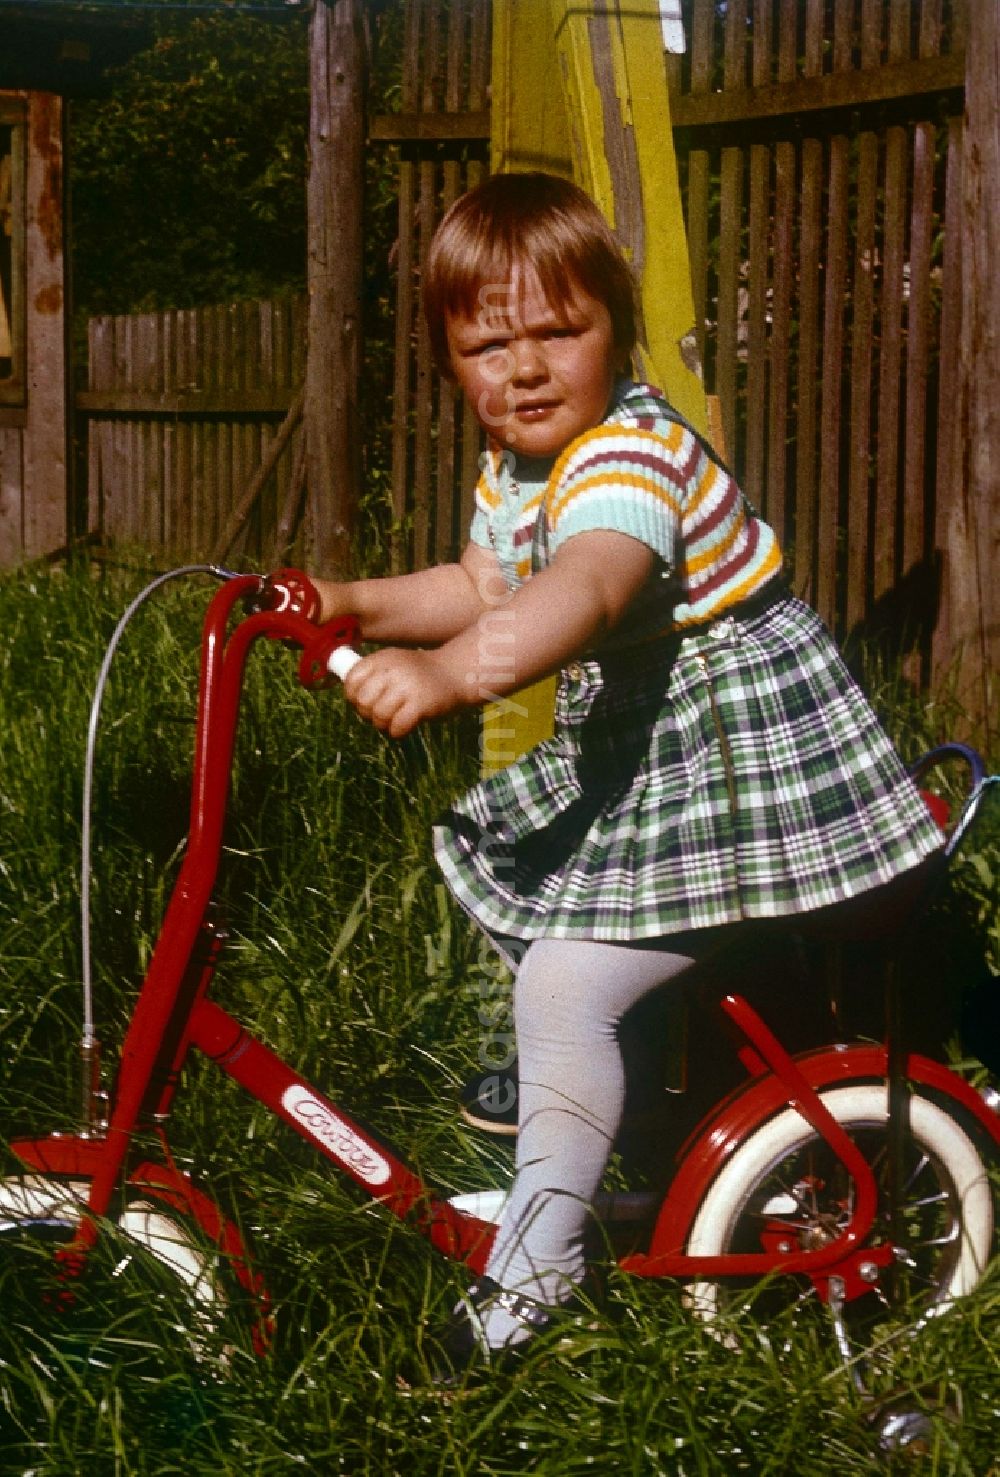 GDR photo archive: Neustrelitz - A girl in the checked rock on a red children's bicycle of the brand Cowboy in Neustrelitz in the federal state Mecklenburg-West Pomerania in the area of the former GDR, German democratic republic